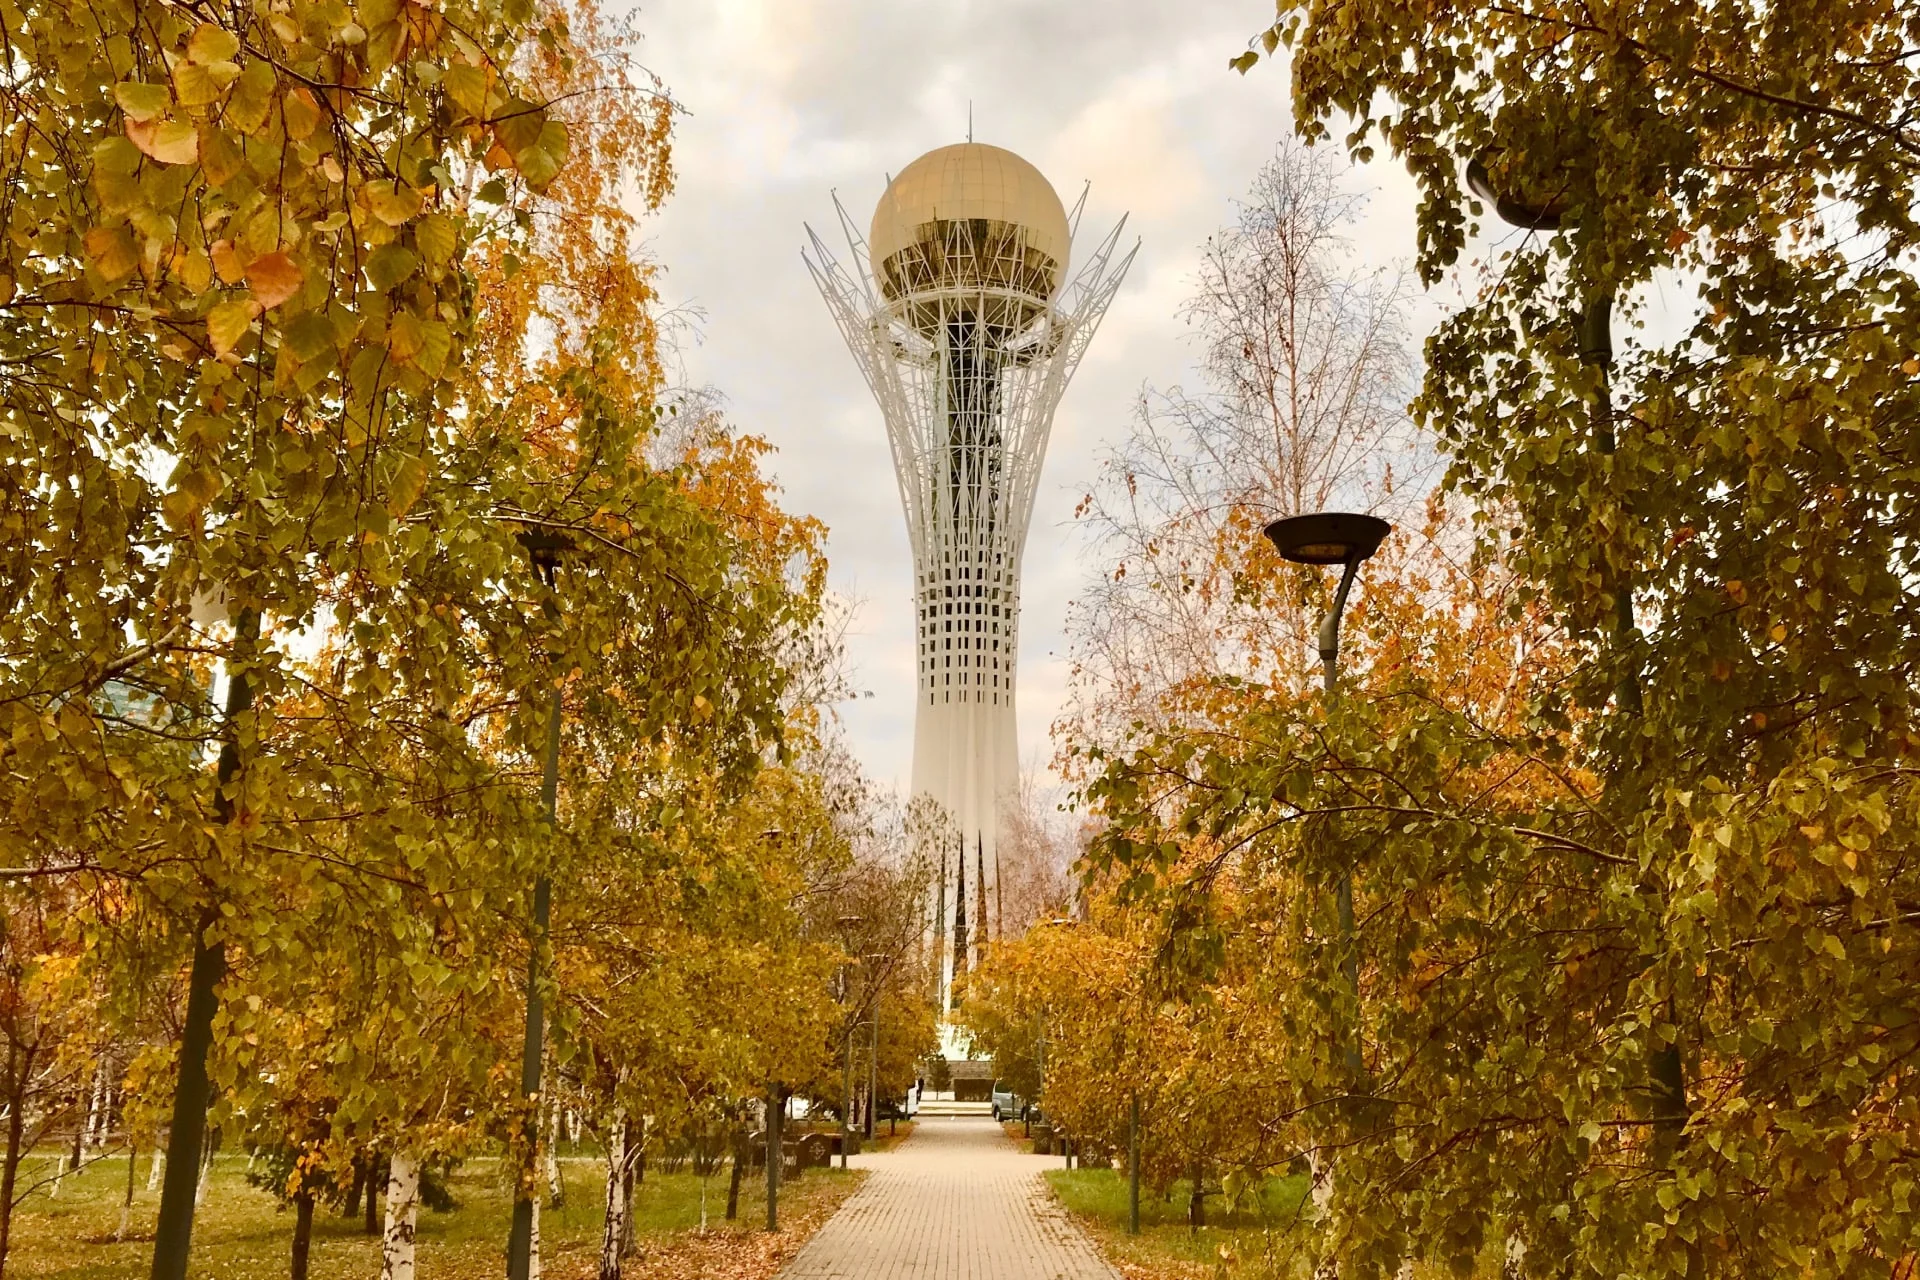 A tall tower in the middle of a park with trees.